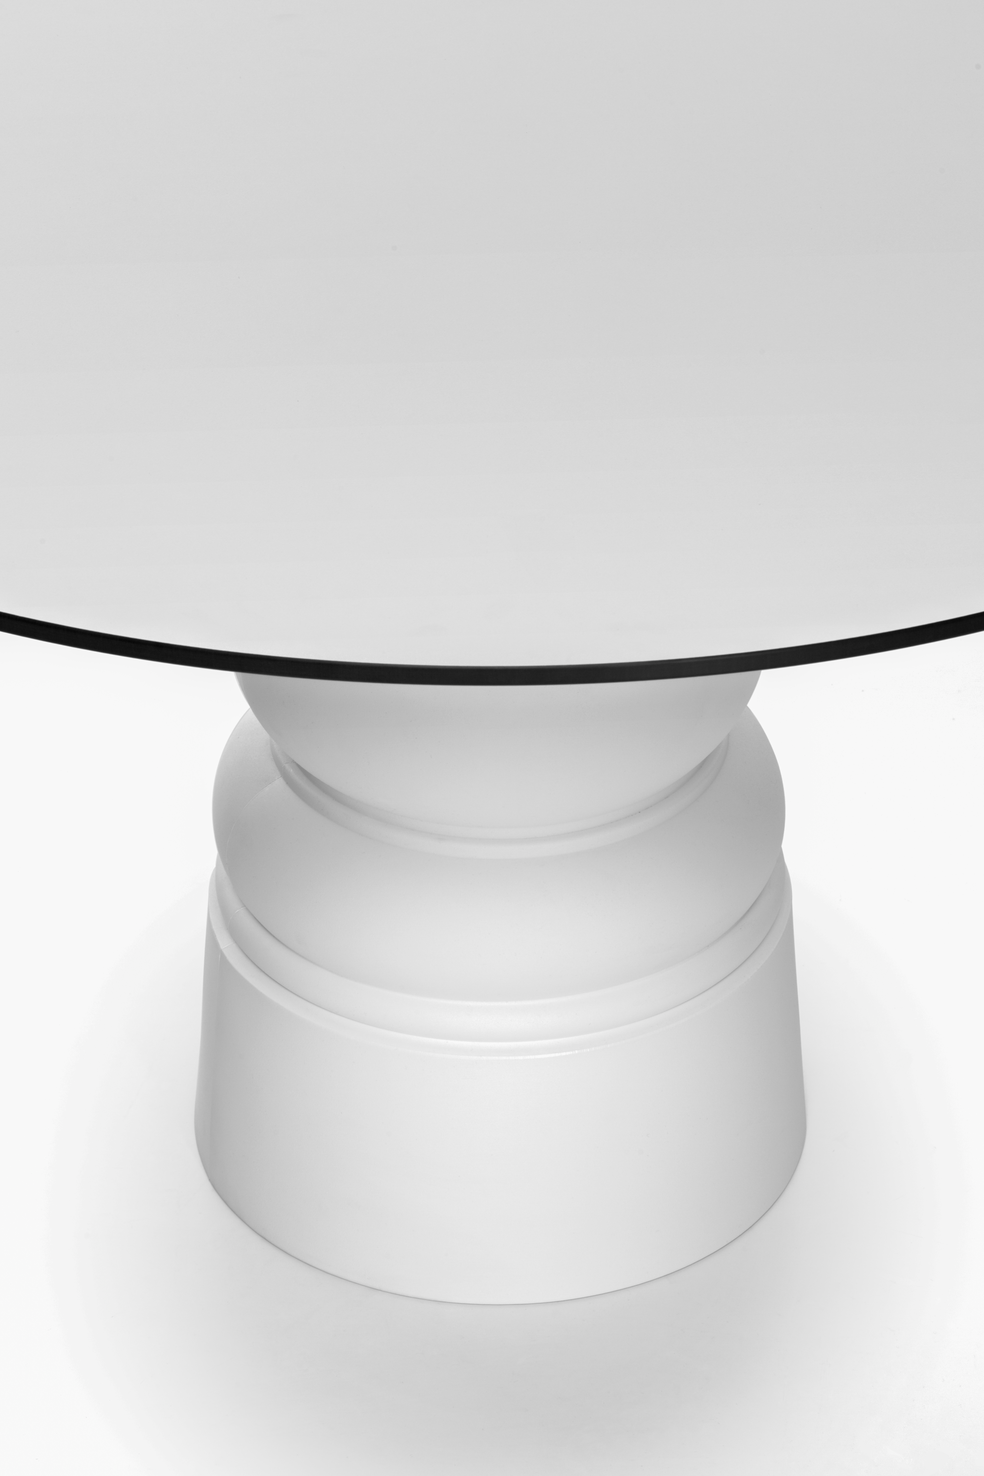 Container Table New Antiques round white hpl detail